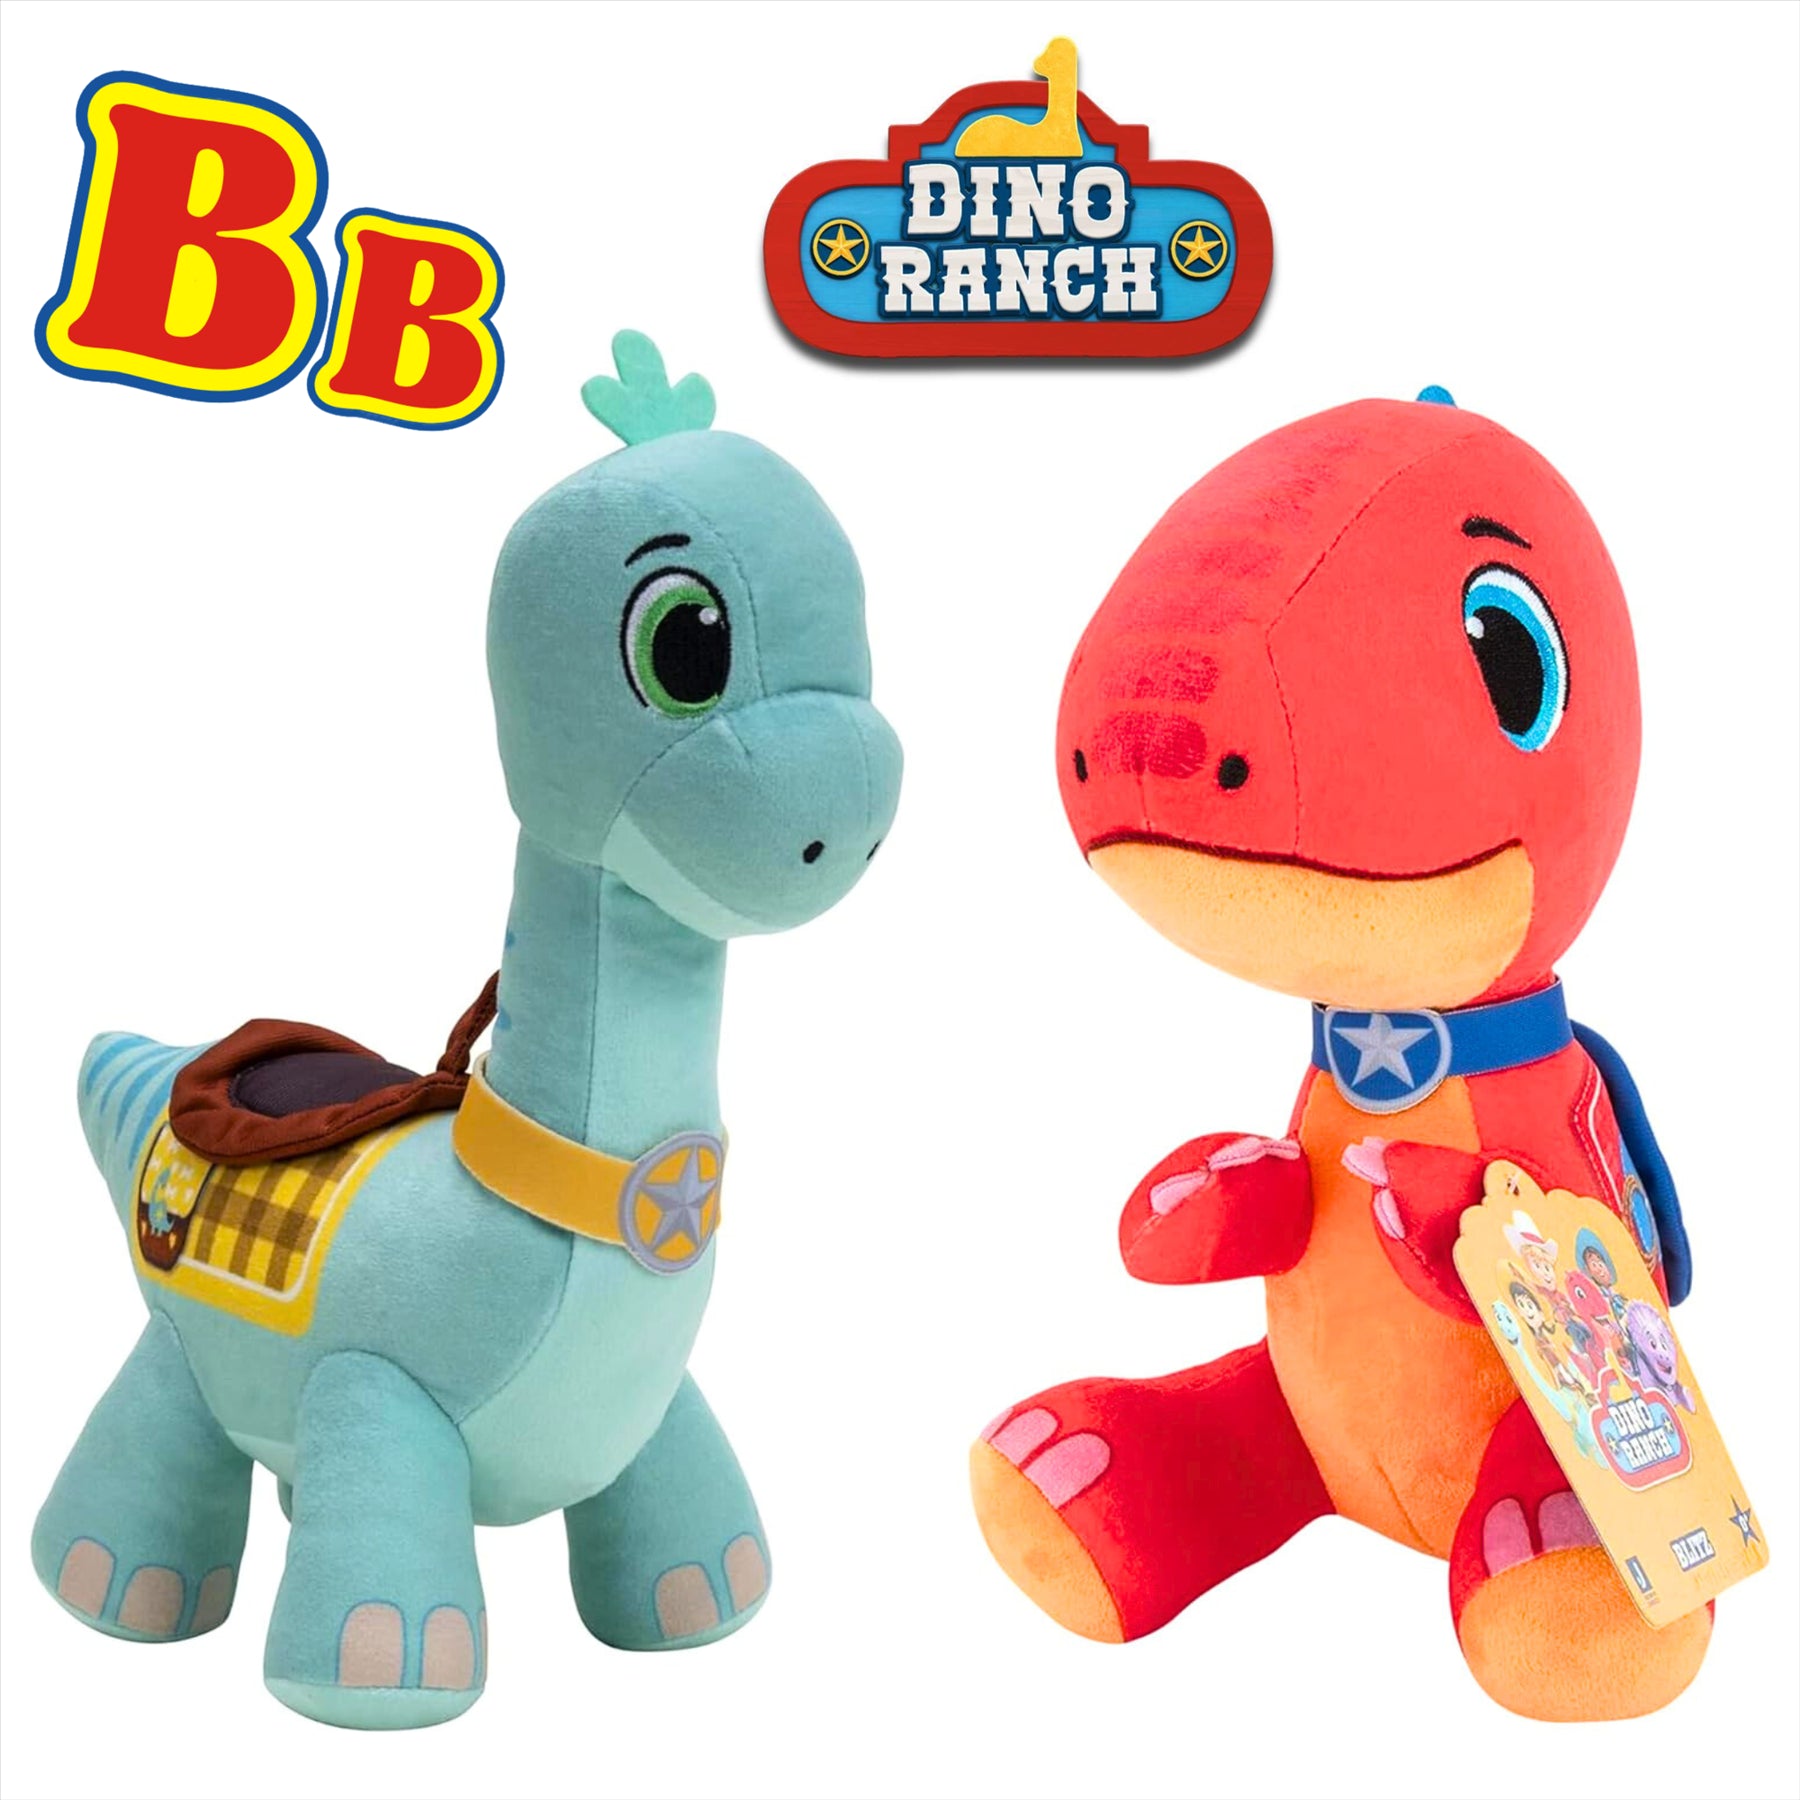 Dino Ranch Clover and Blitz 20cm Super Soft Embroidered Gift Quality Plush Toys